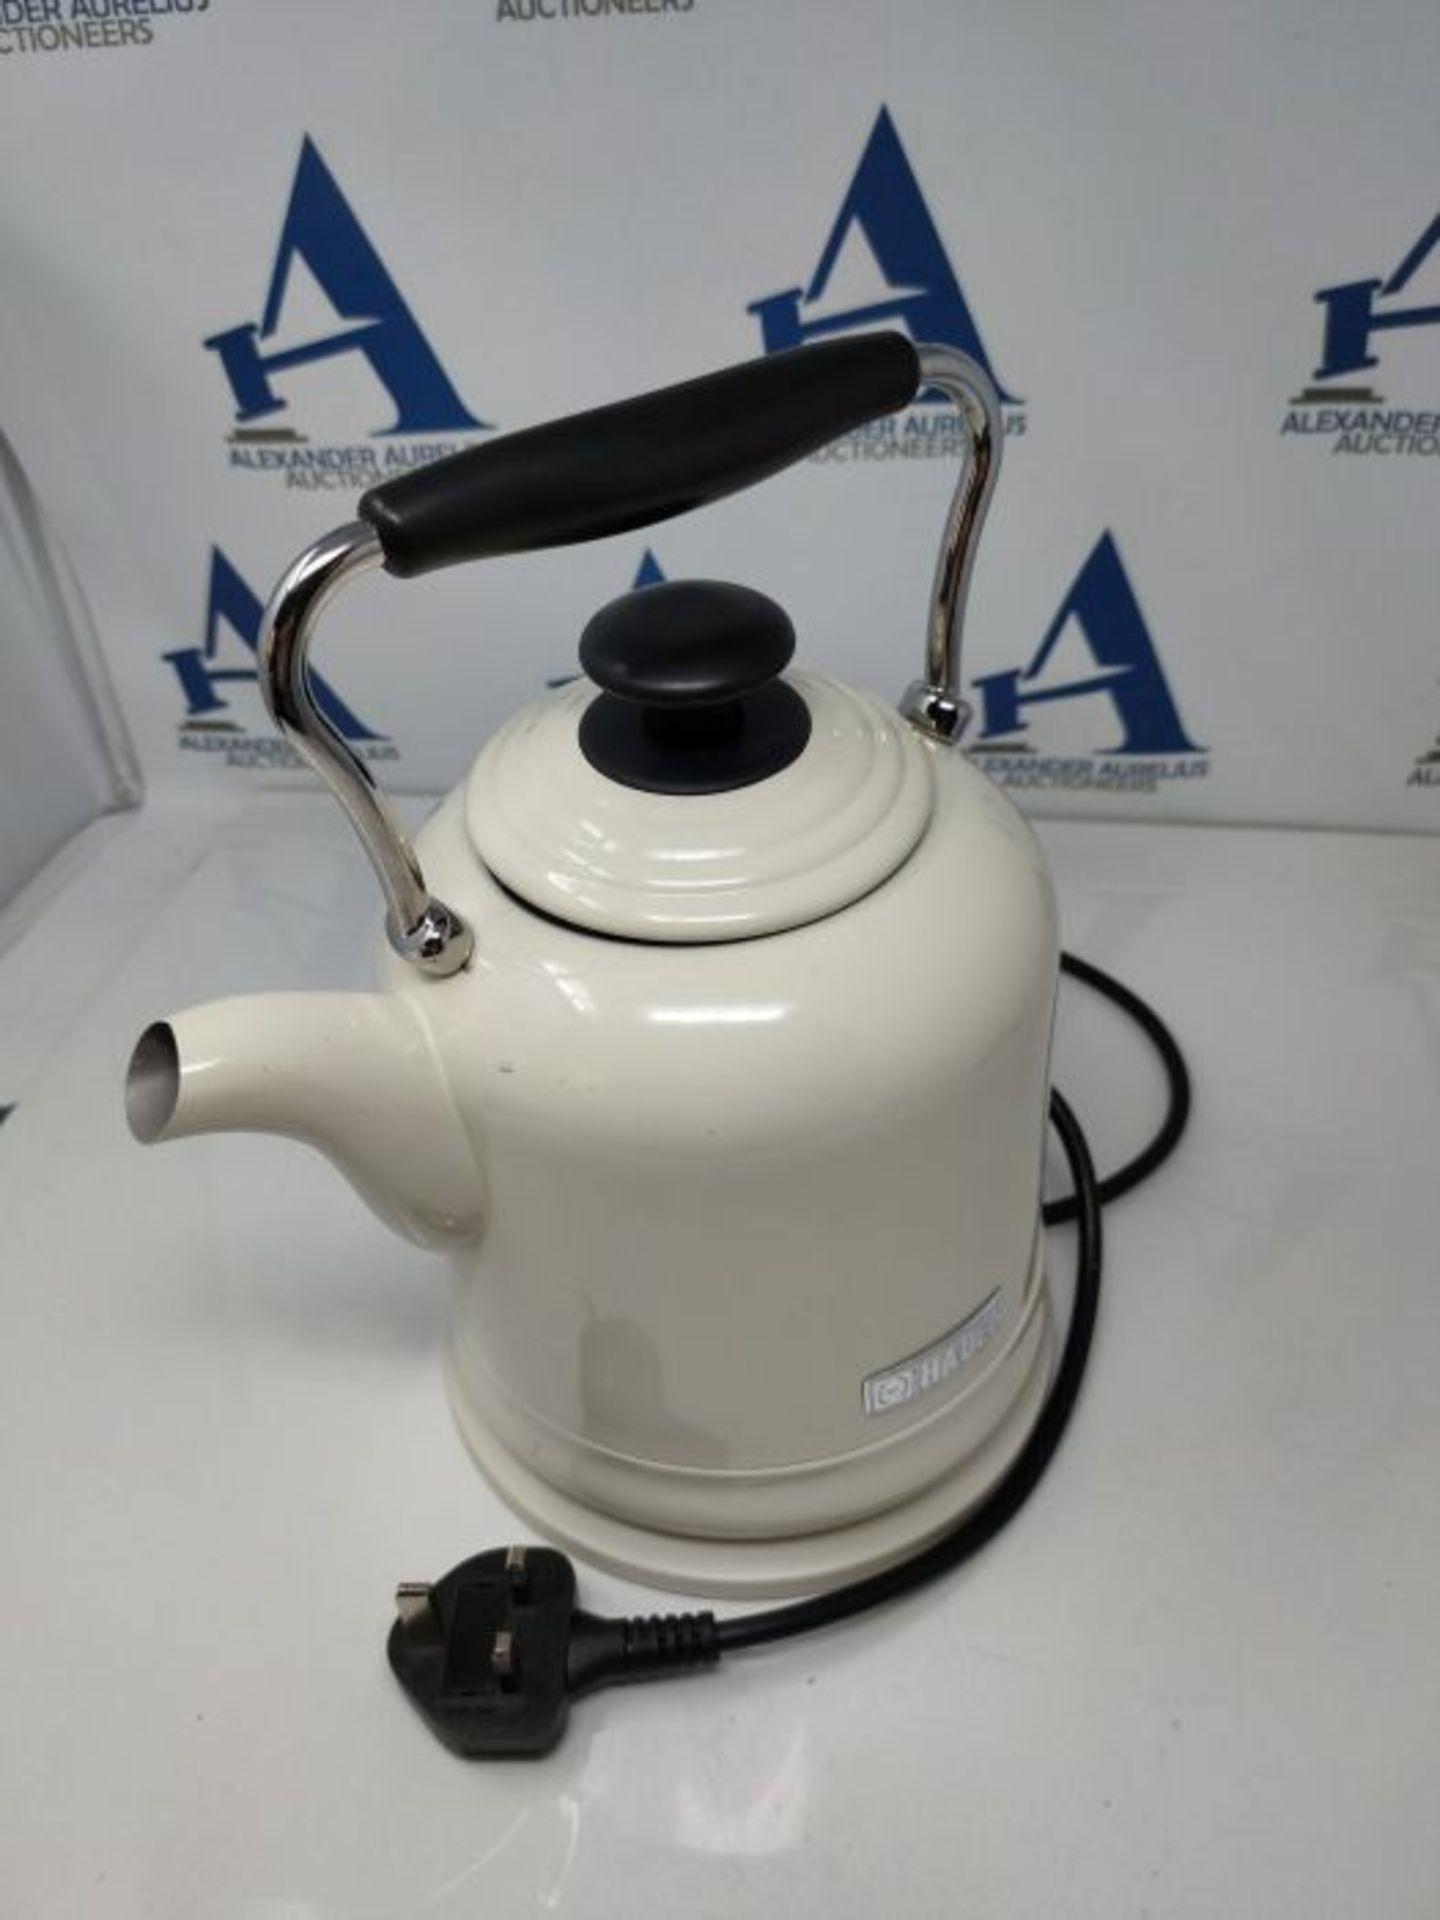 Haden Highclere Cream Kettle Cordless - Electric Fast Boil Kettle, 3000W, 1.5 Litre, S - Image 3 of 3